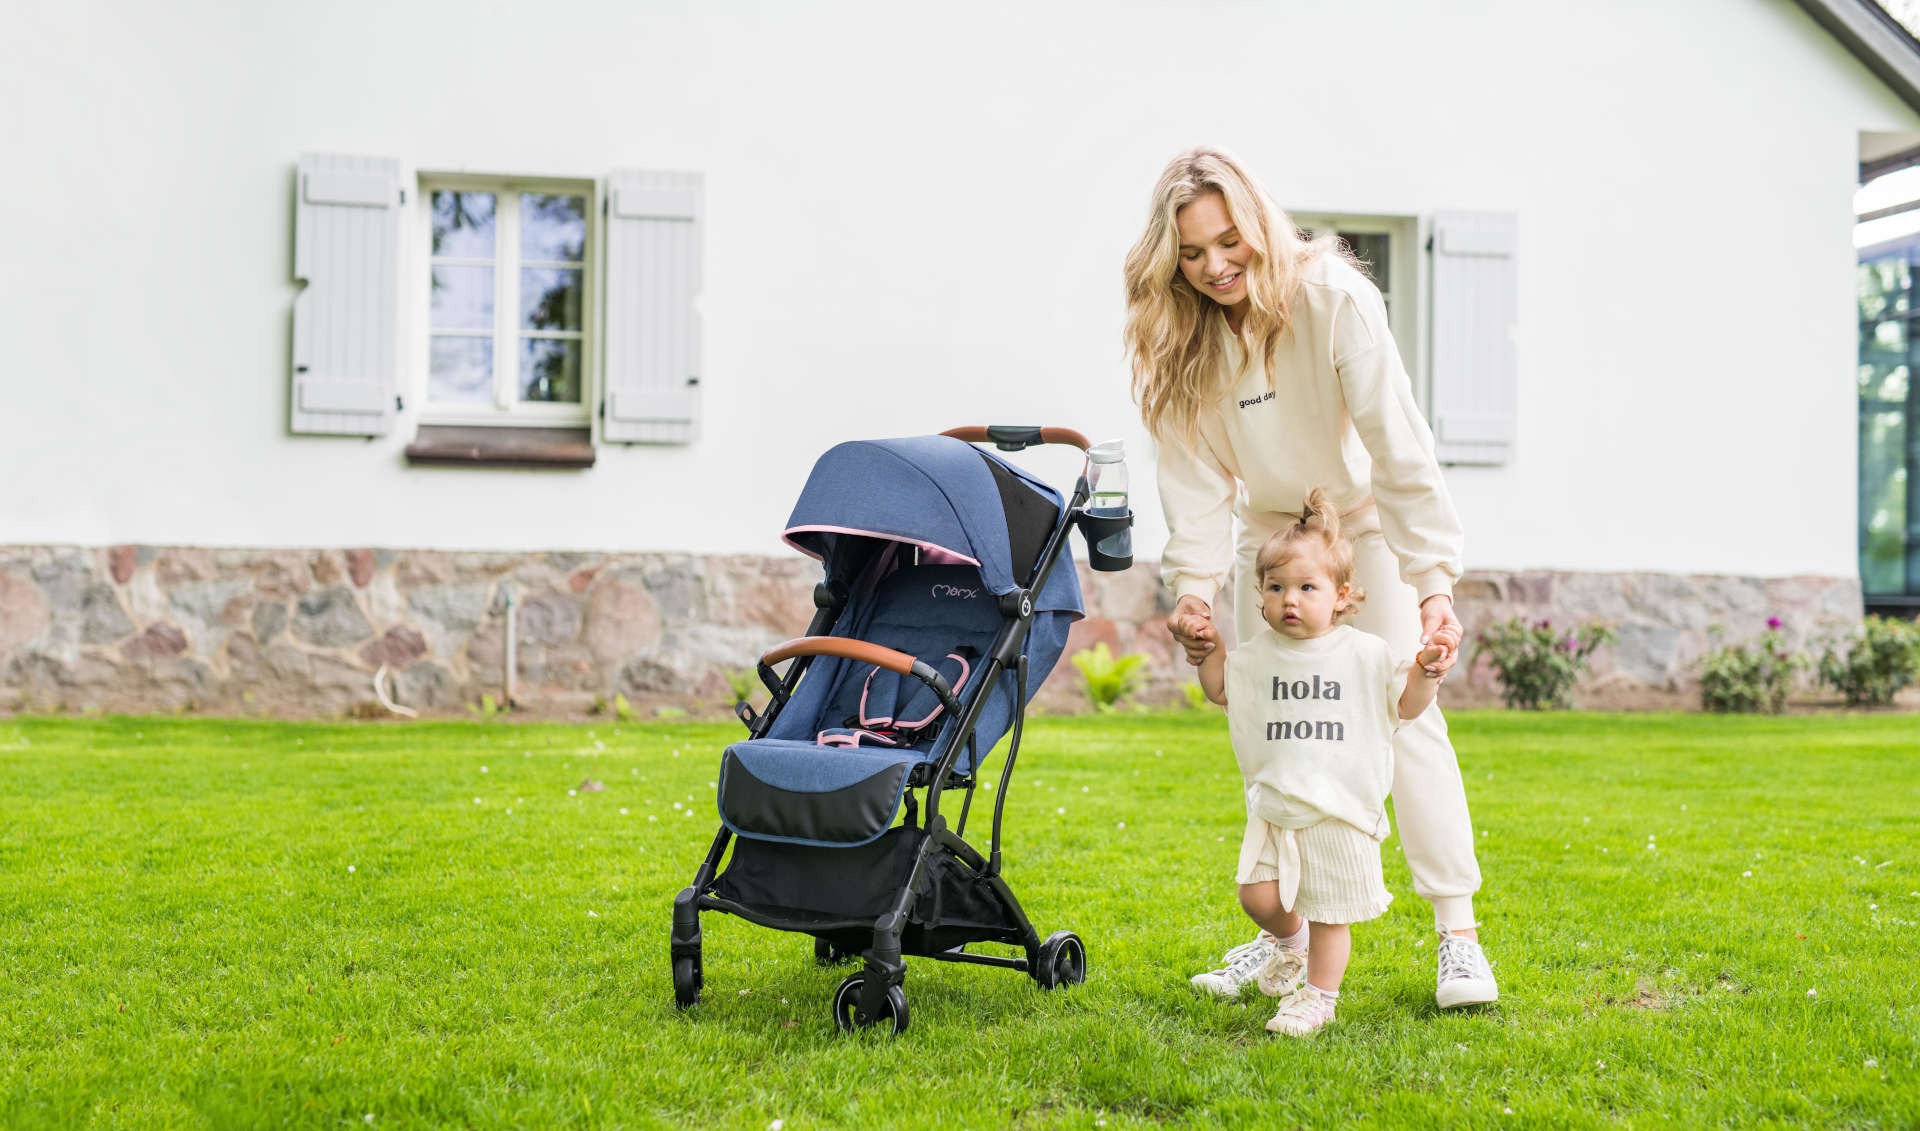 What questions to ask when buying a stroller